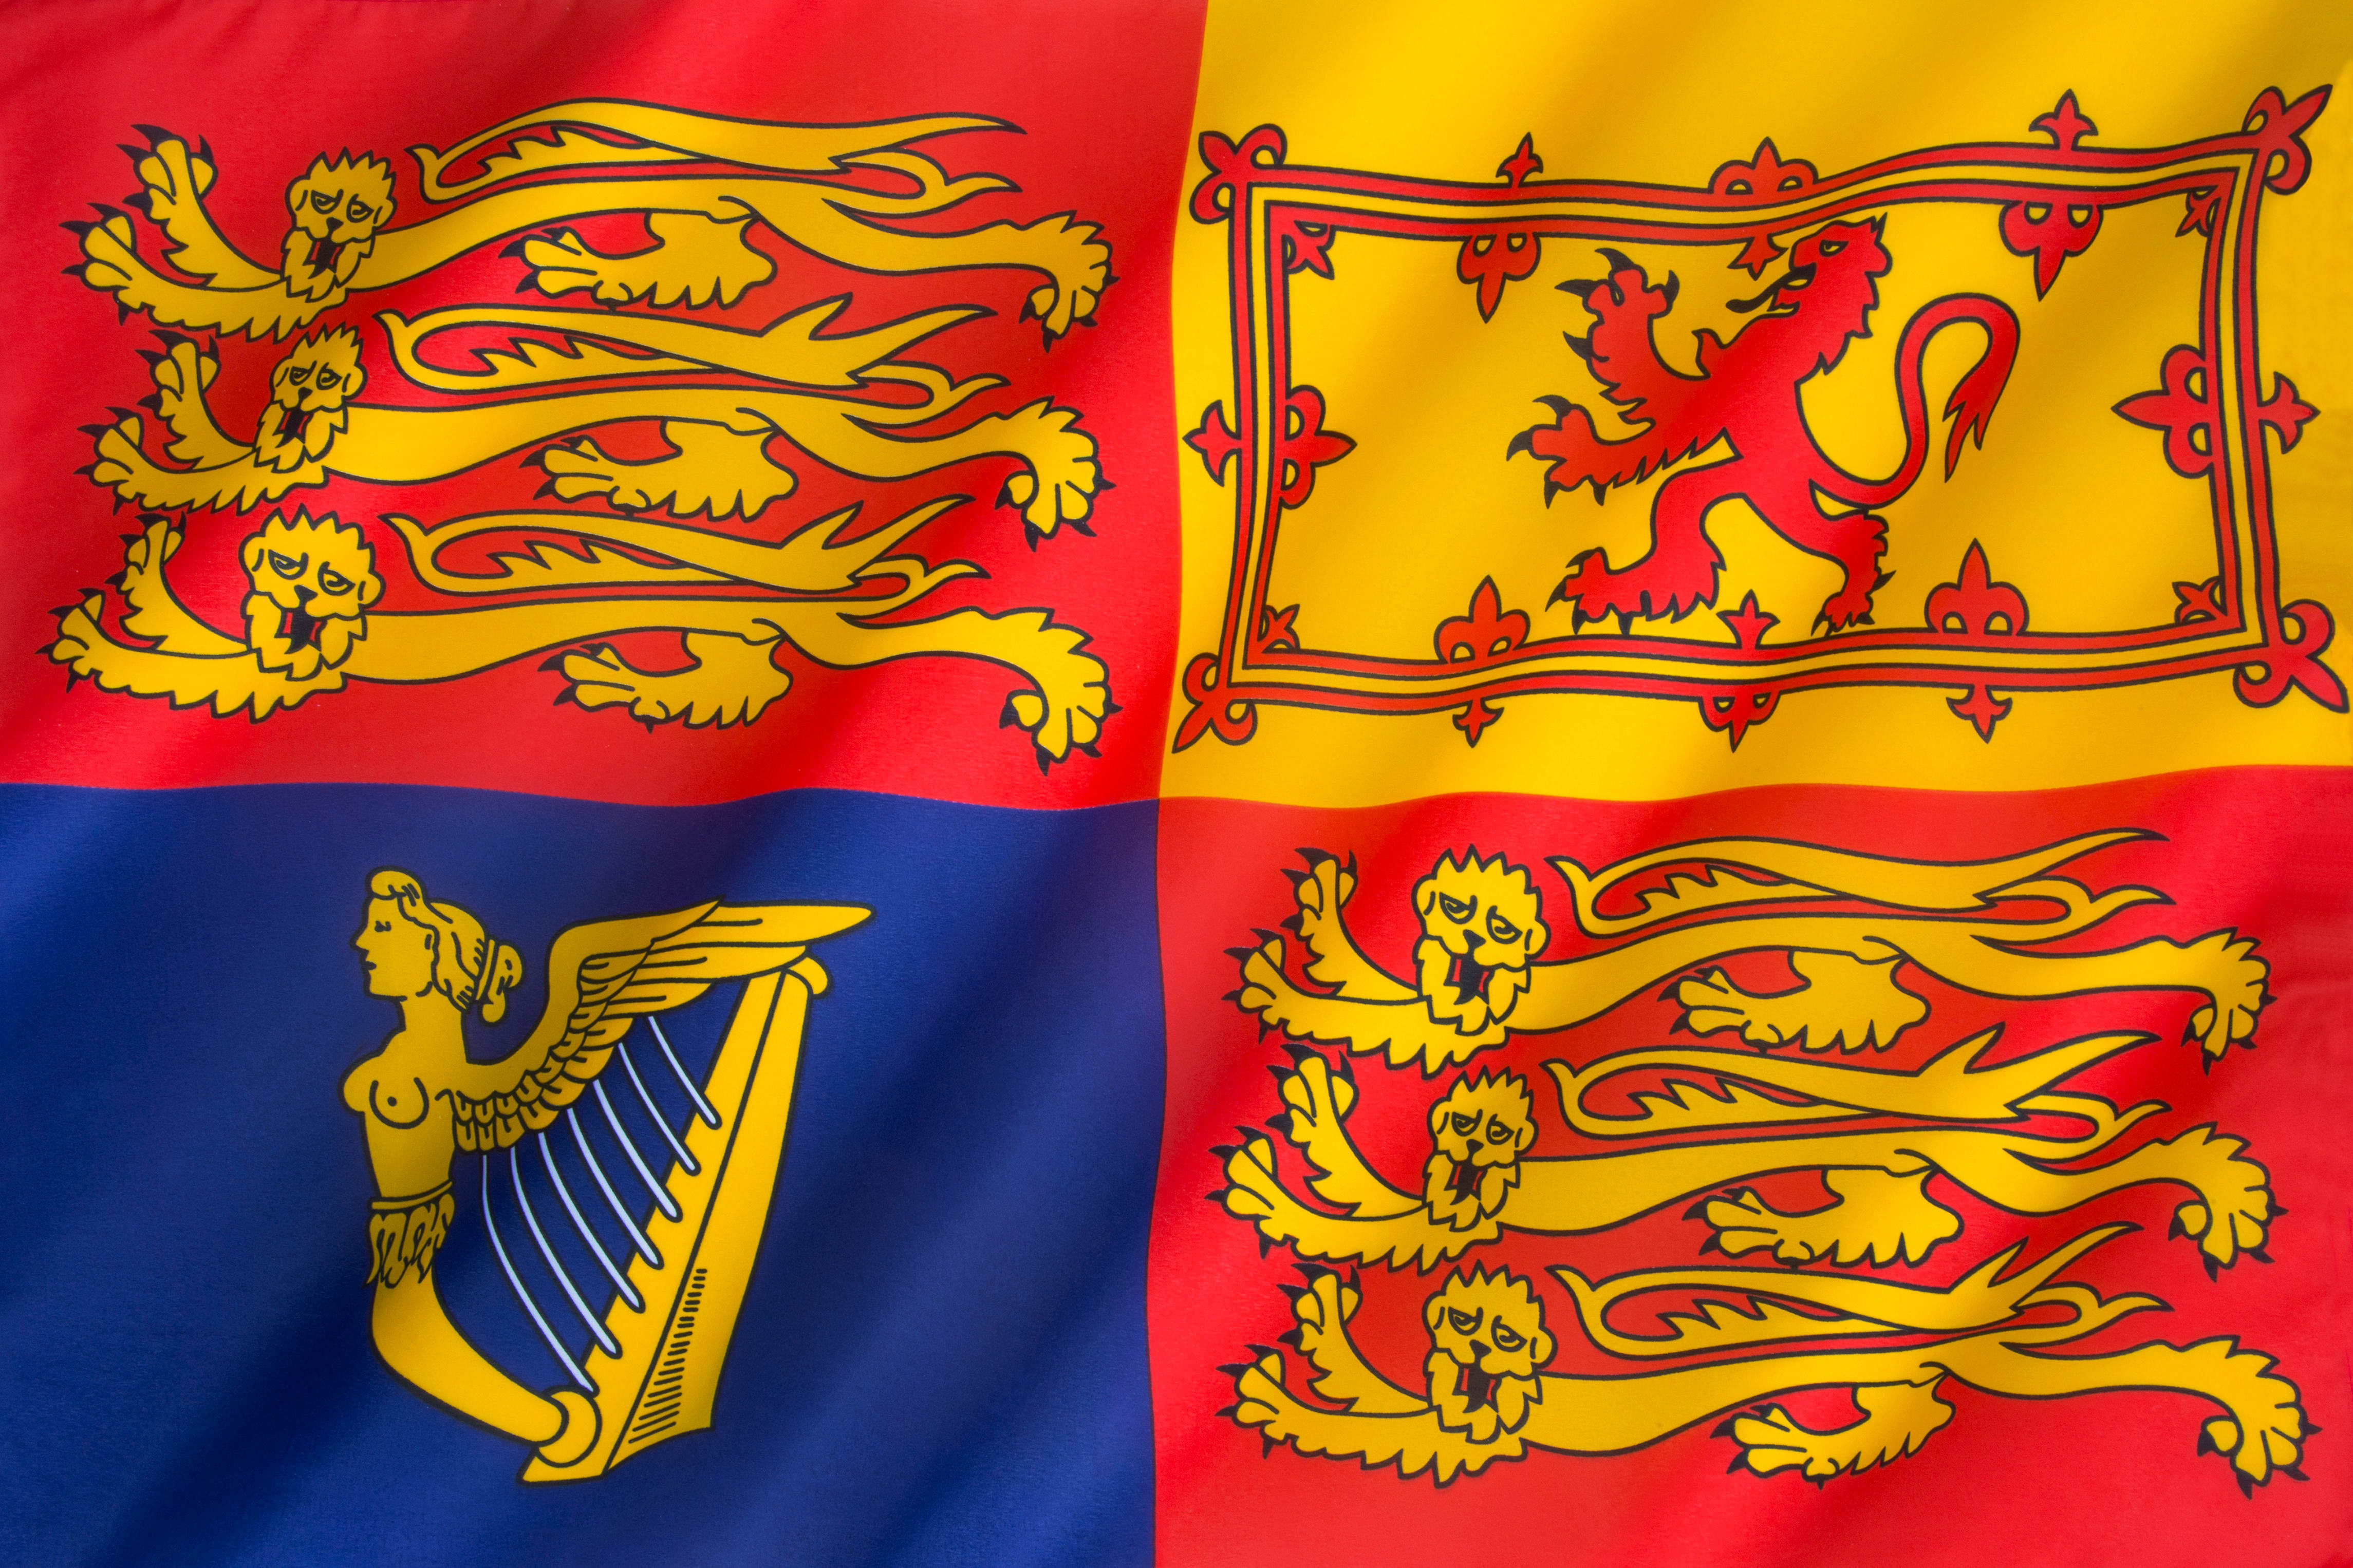 A red, yellow and blue flag with intricate symbolic designs